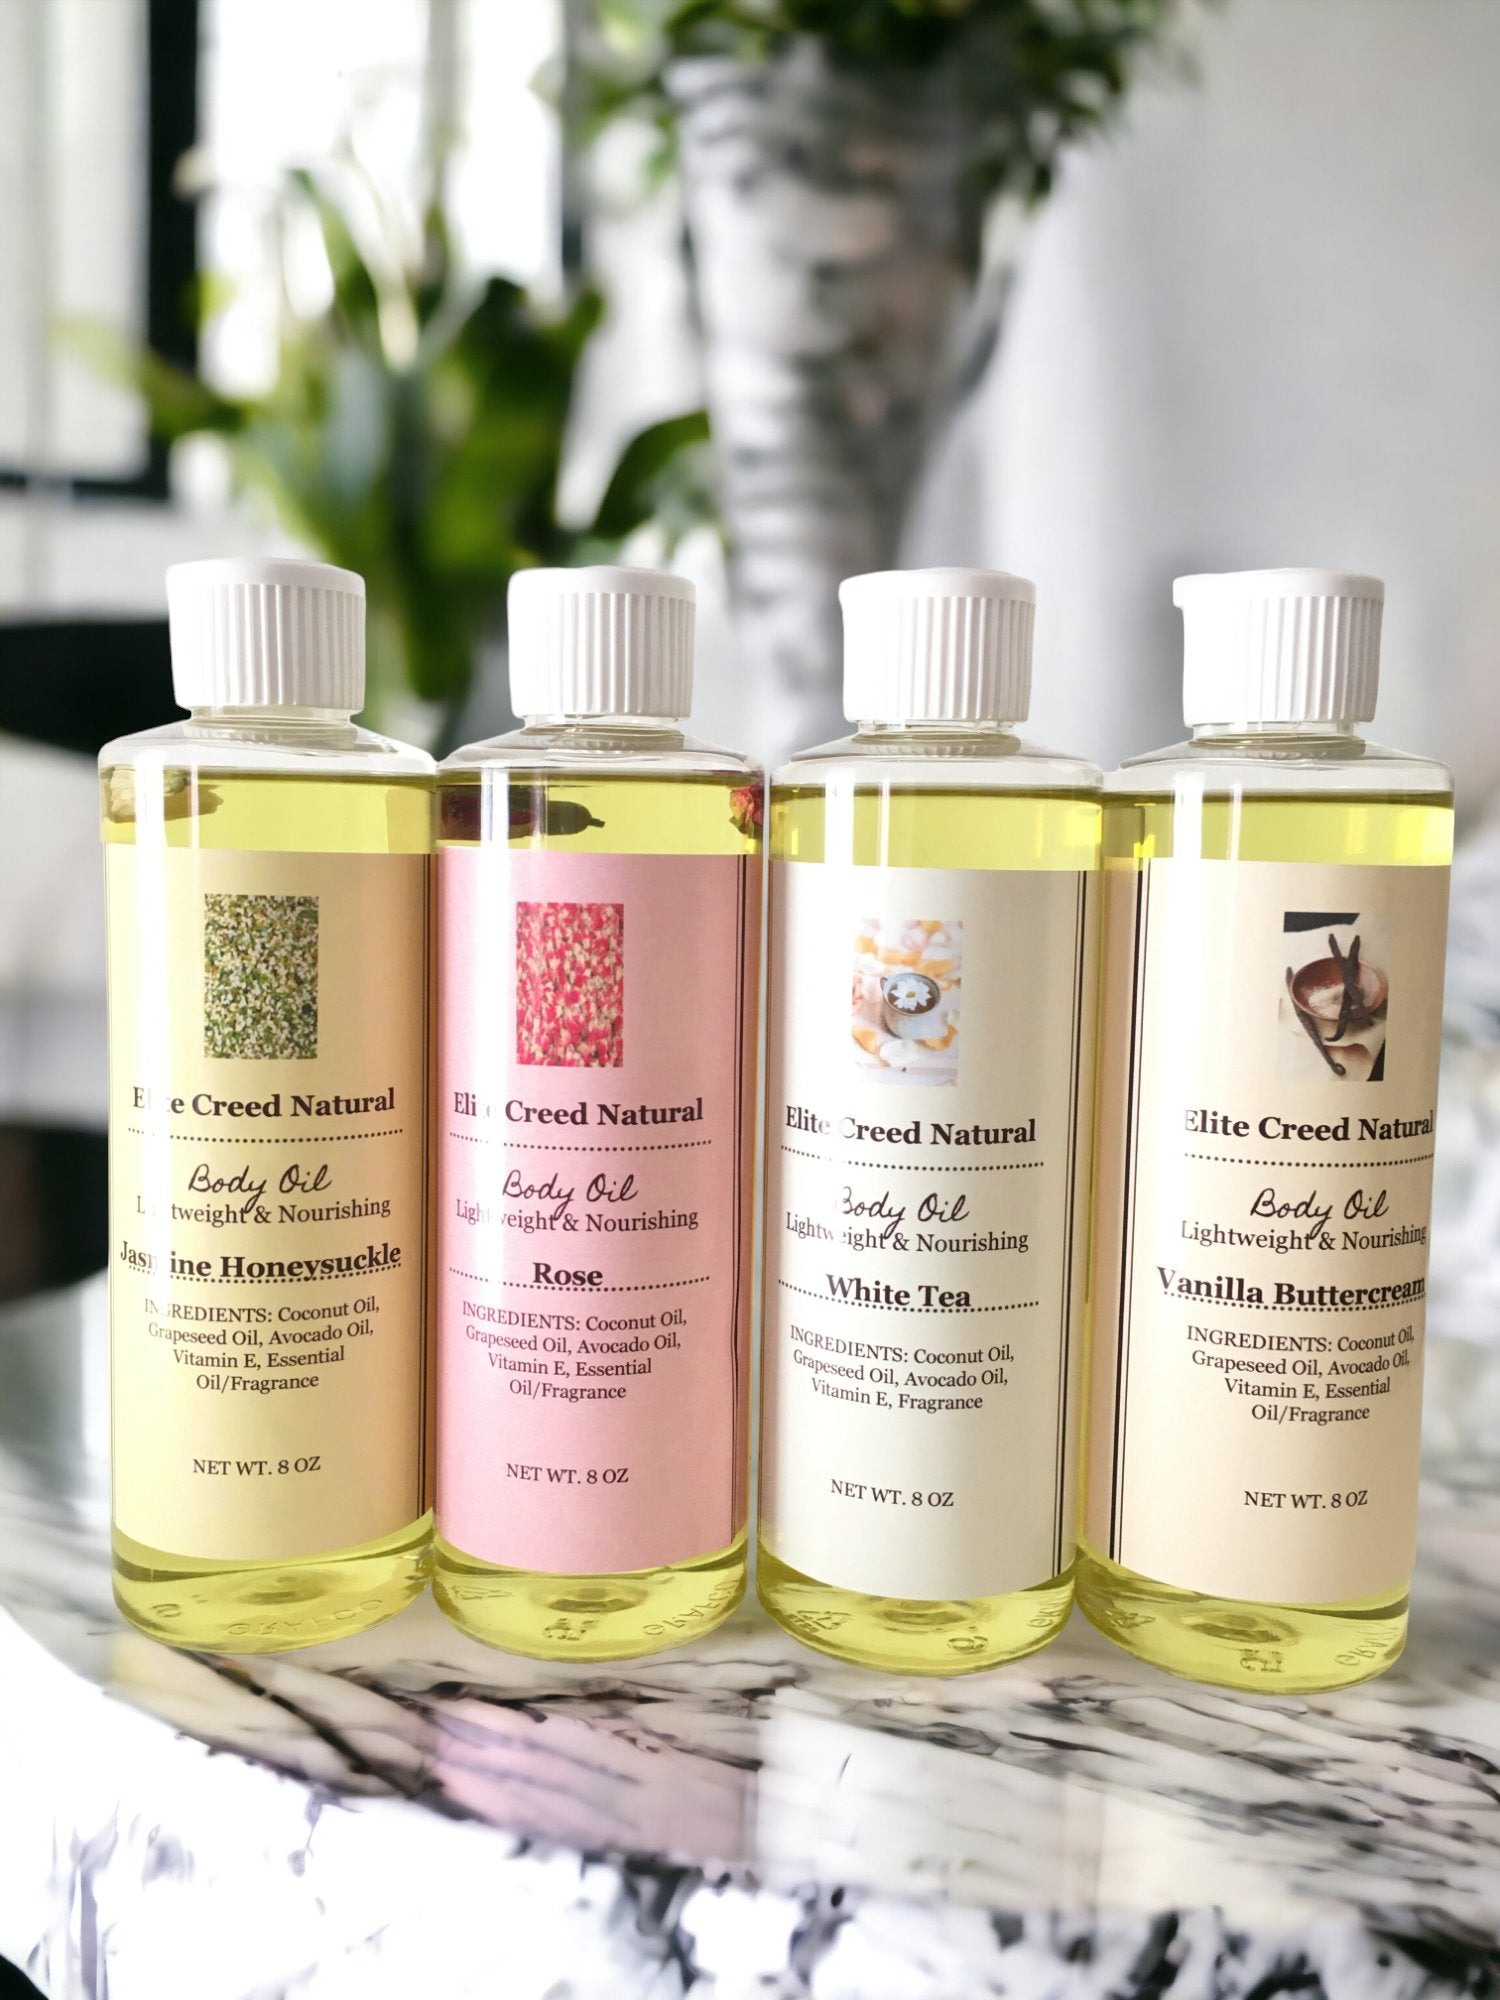 Scented Body Oil - Elite Creed Natural